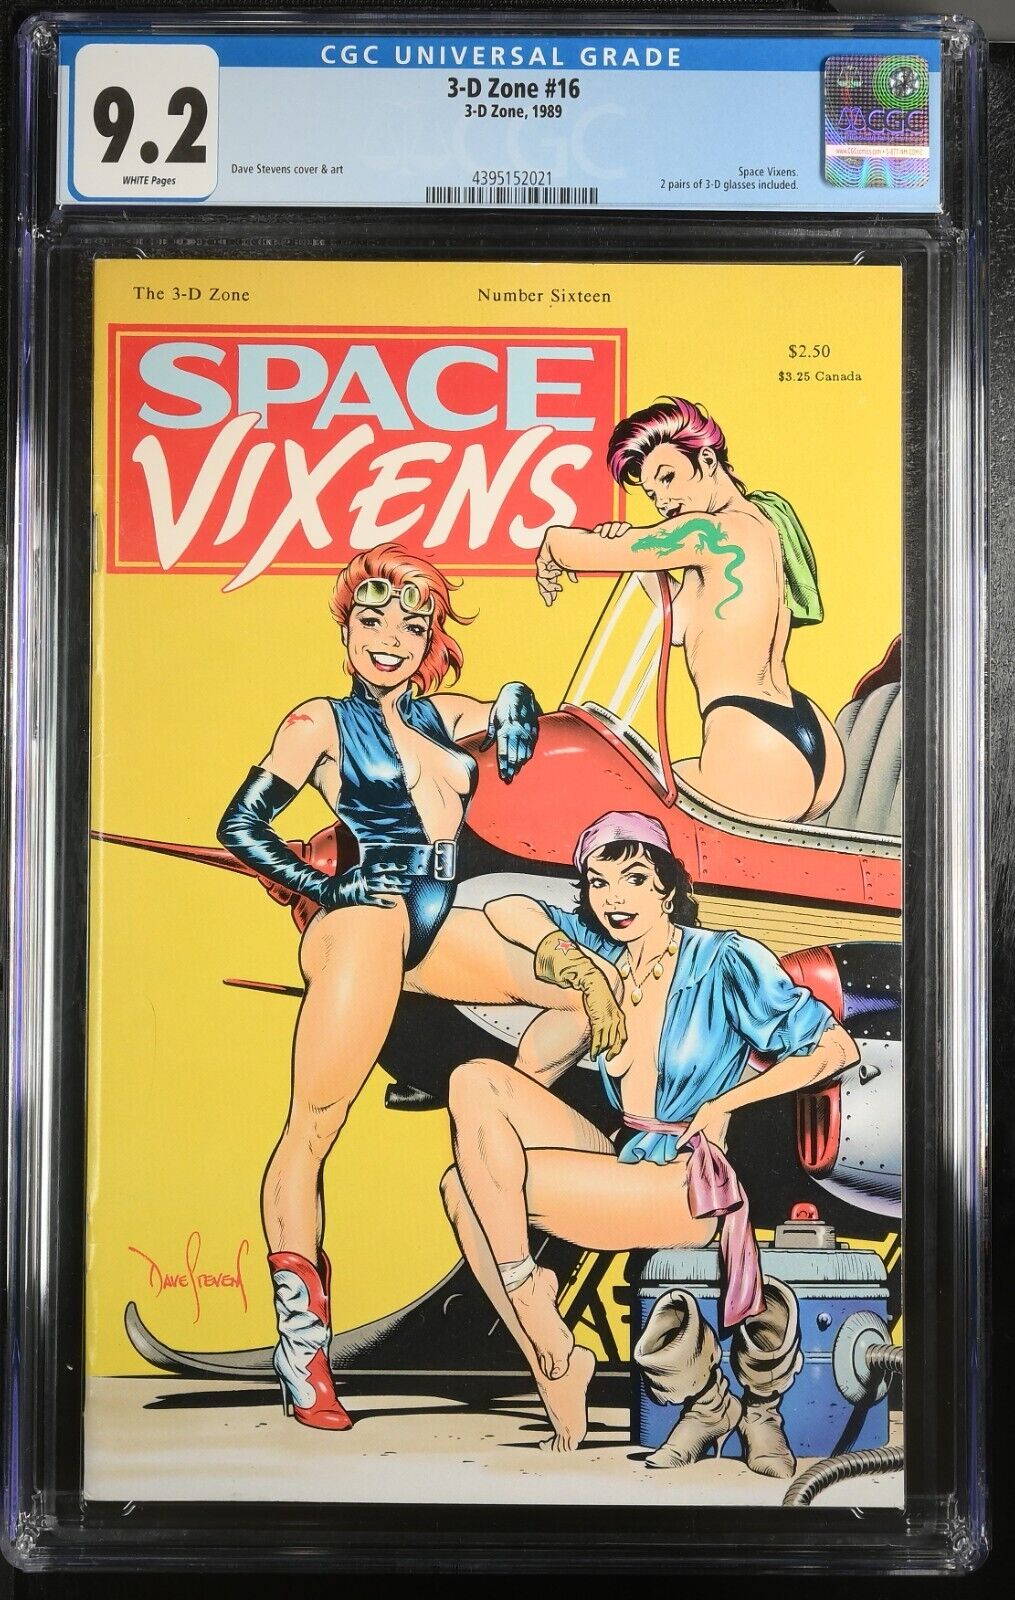 3-D ZONE #16 SPACE VIXENS - CGC 9.2 - WP - NM- DAVE STEVENS GLASSES INCLUDED